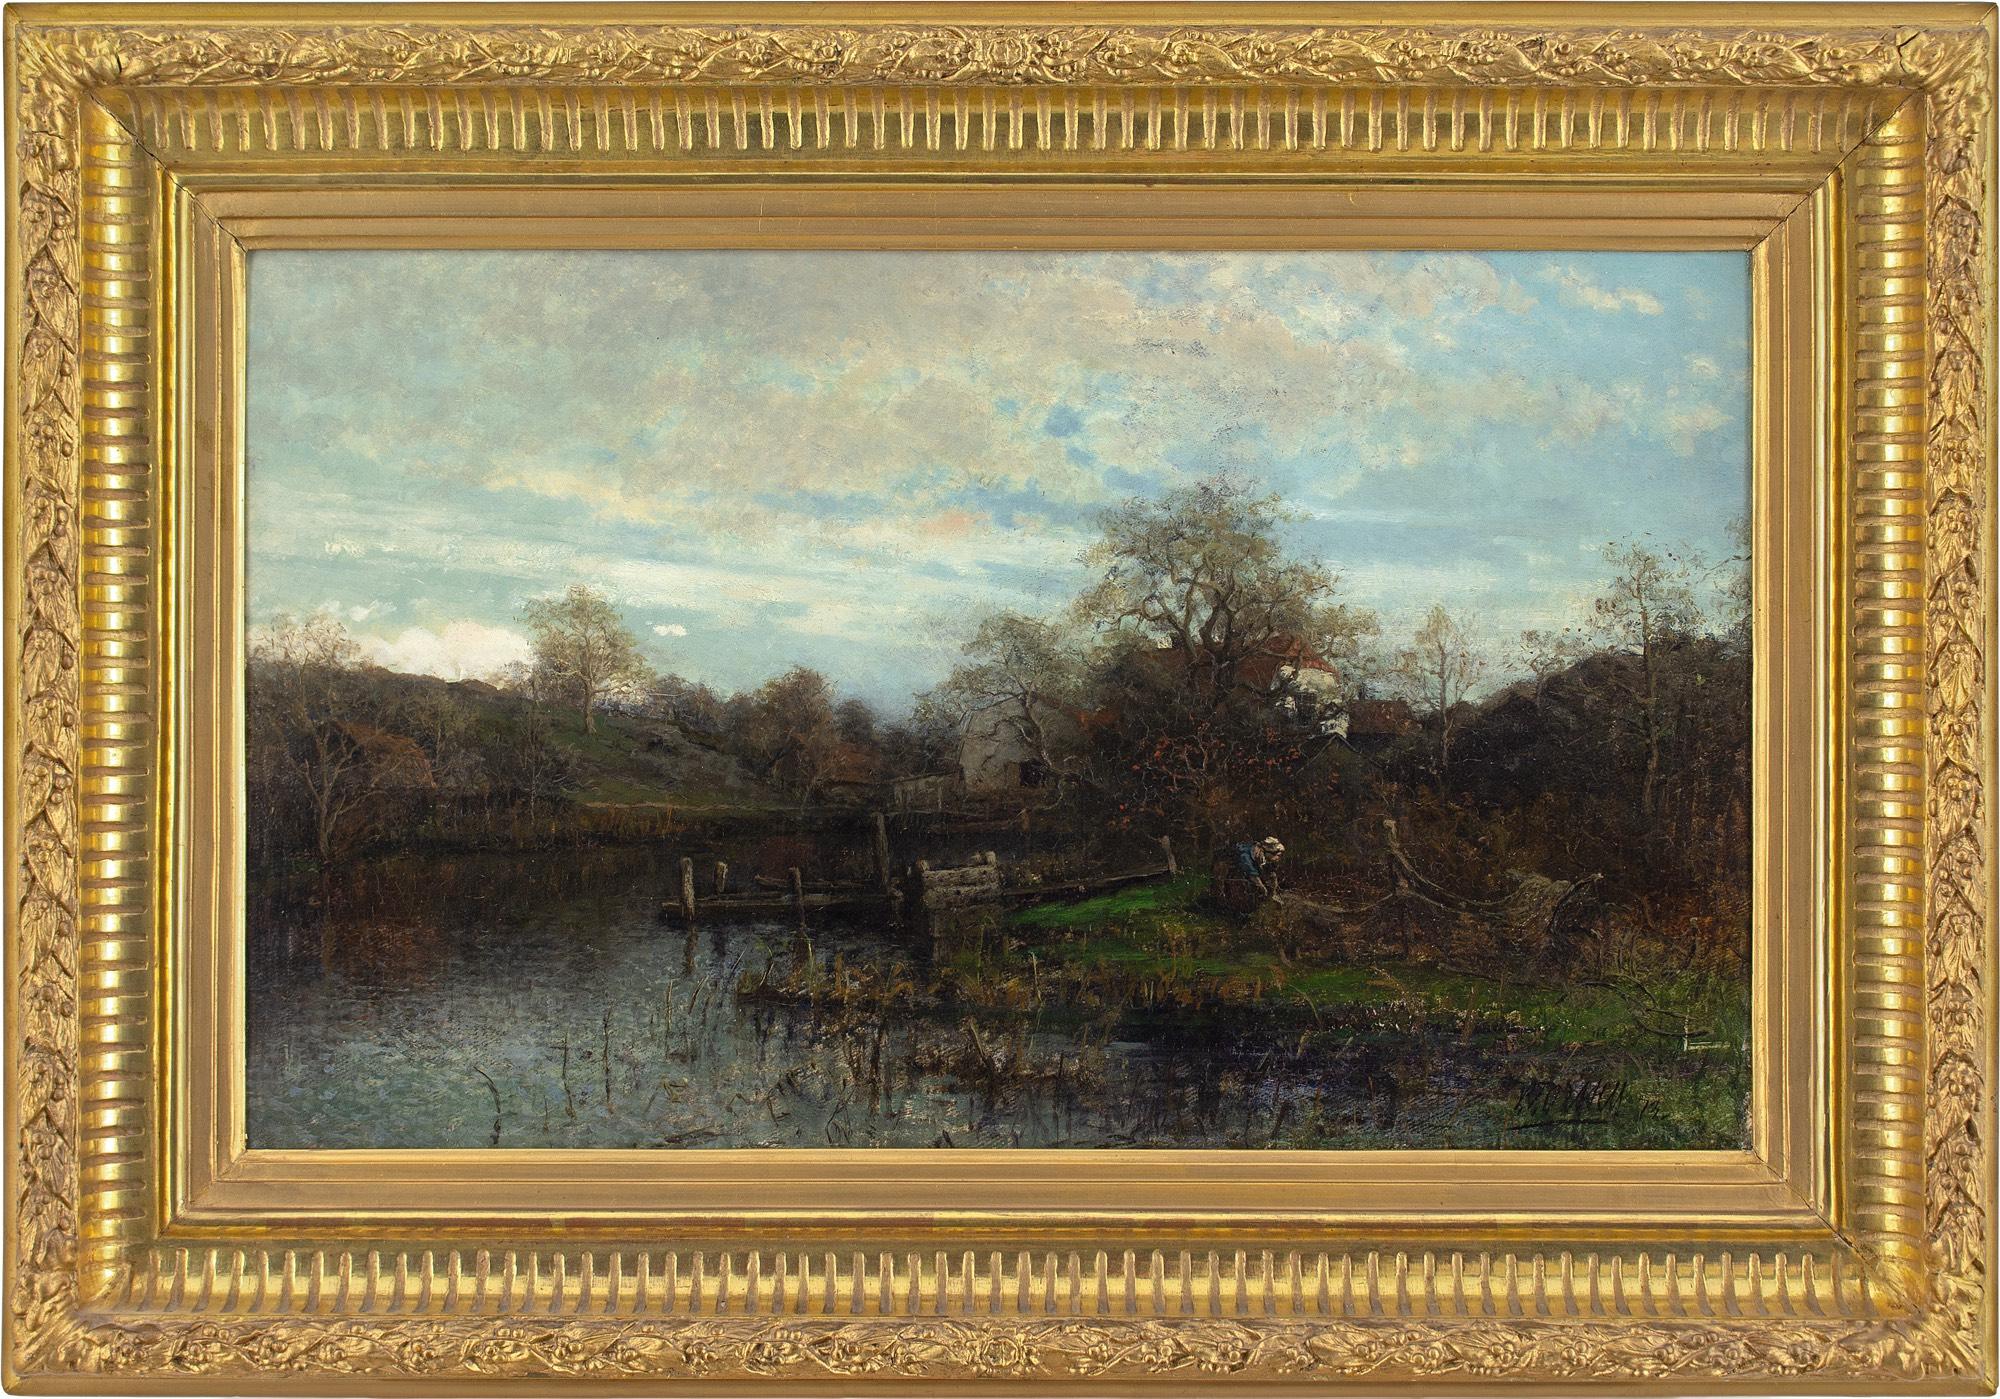 This spirited 19th-century oil painting by Swedish artist Victor Forssell (1846-1931) depicts a river landscape with cottages and figure.

Painted in 1873, this sublime piece typifies the majestic handling of a celebrated artist with the world at